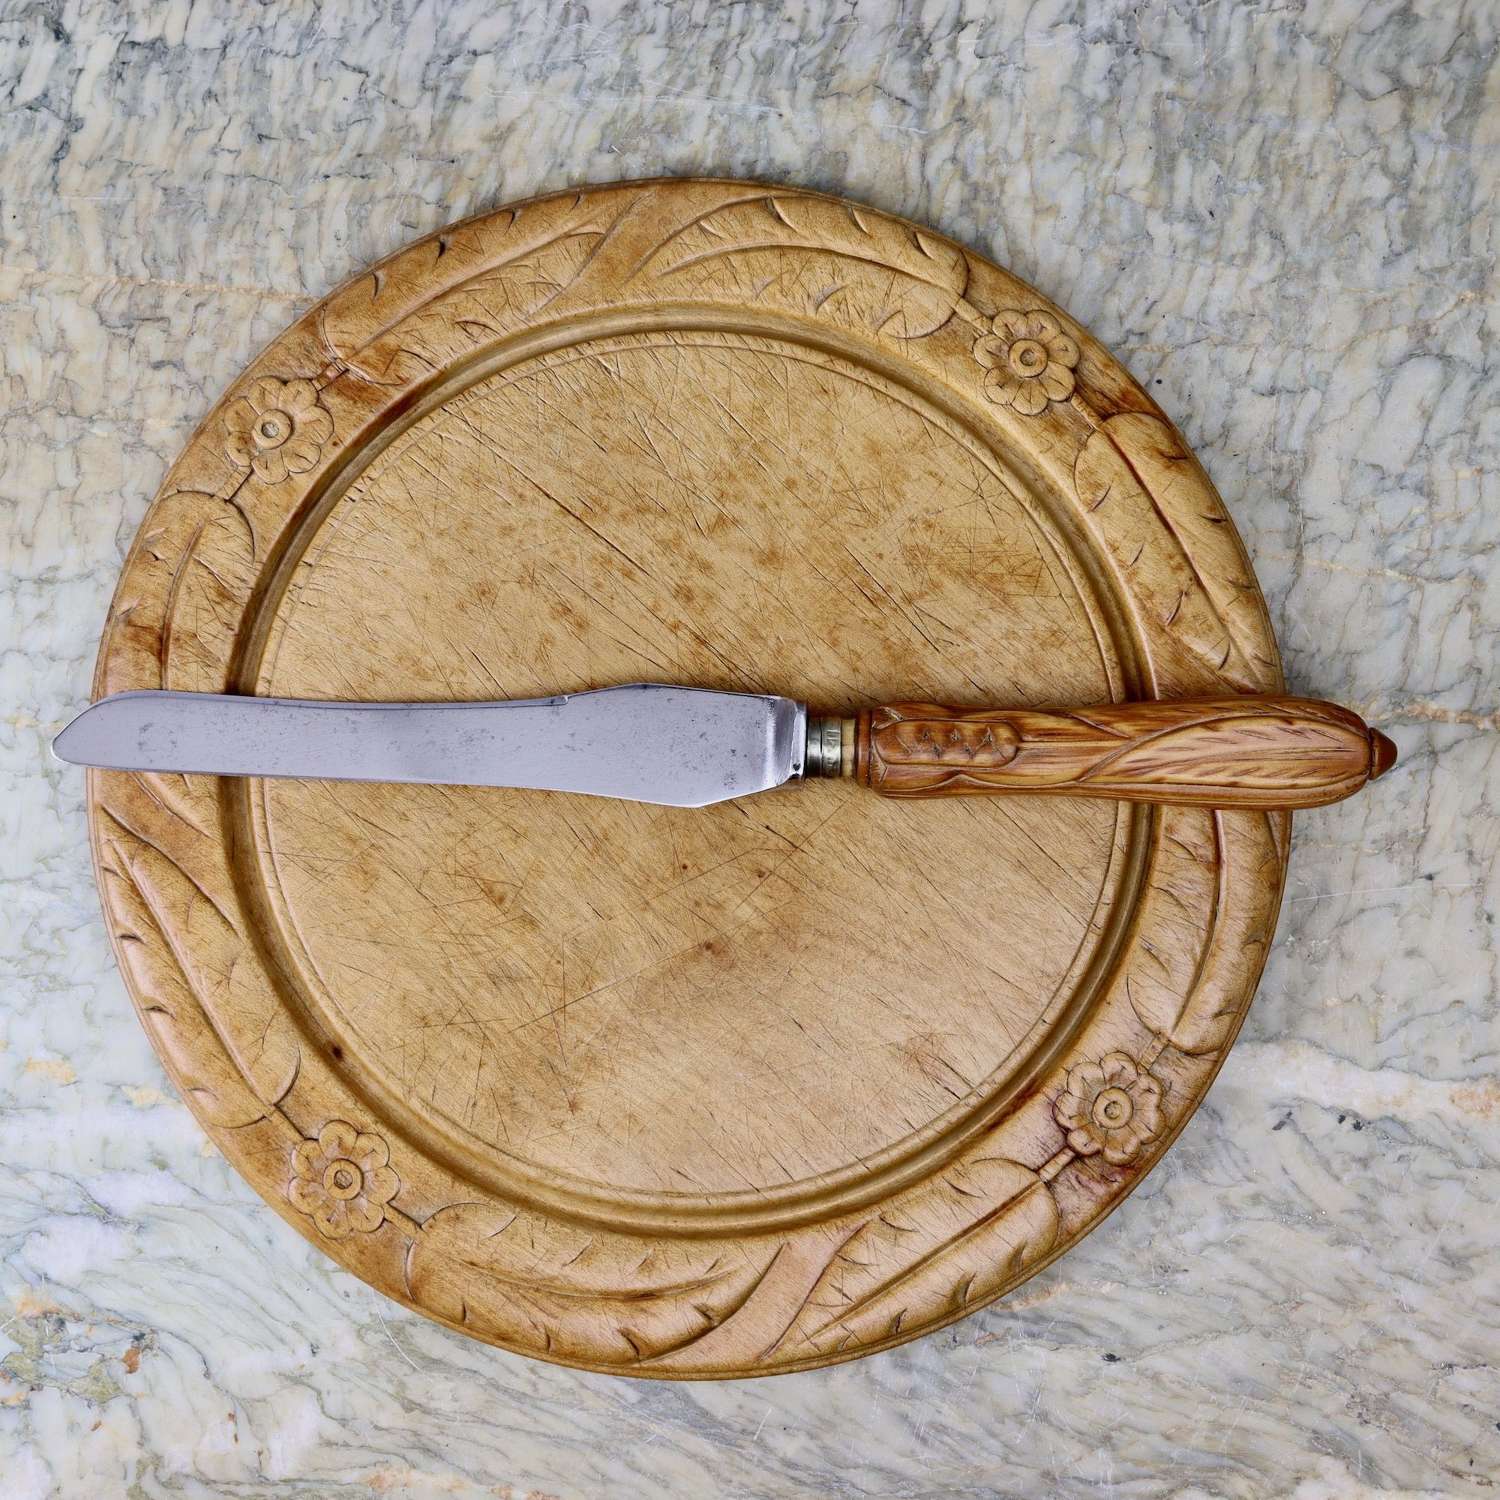 Breadknife Carved with Corn